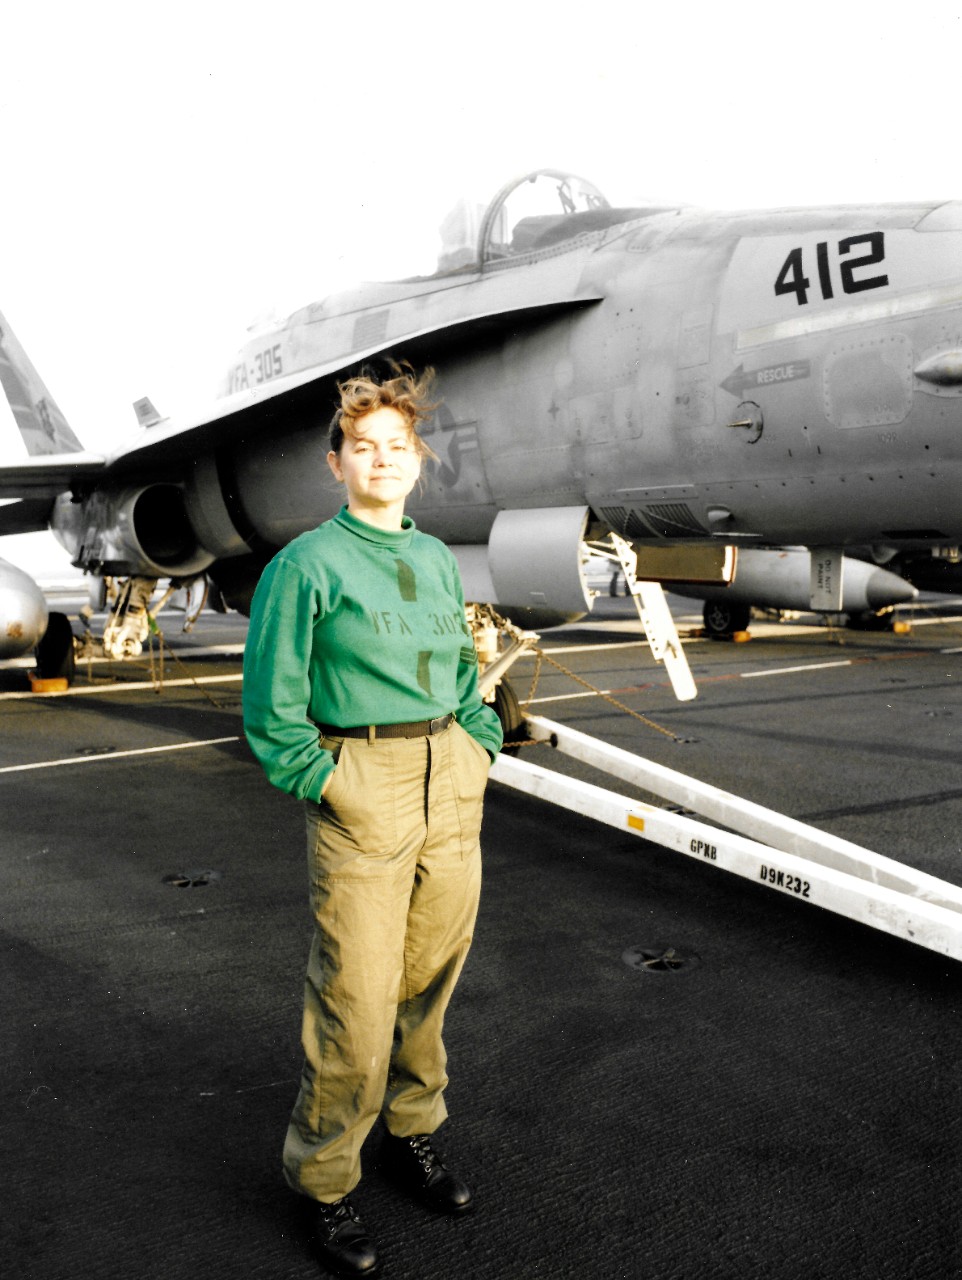 330-CFD-DN-SC-93-05709:   Aviation Structural Mechanic First Class Castilleja, 1992.   Castilleja, a reservist attached to Strike Fighter Squadron 305 (VFA-305), stands beside an F/A-18A Hornet aircraft on the flight desk of USS Nimitz (CVN-68).  Photographed by PH2 Tim Tow, August 12, 1992.   Official U.S. Navy Photograph, now in the collections of the National Archives.